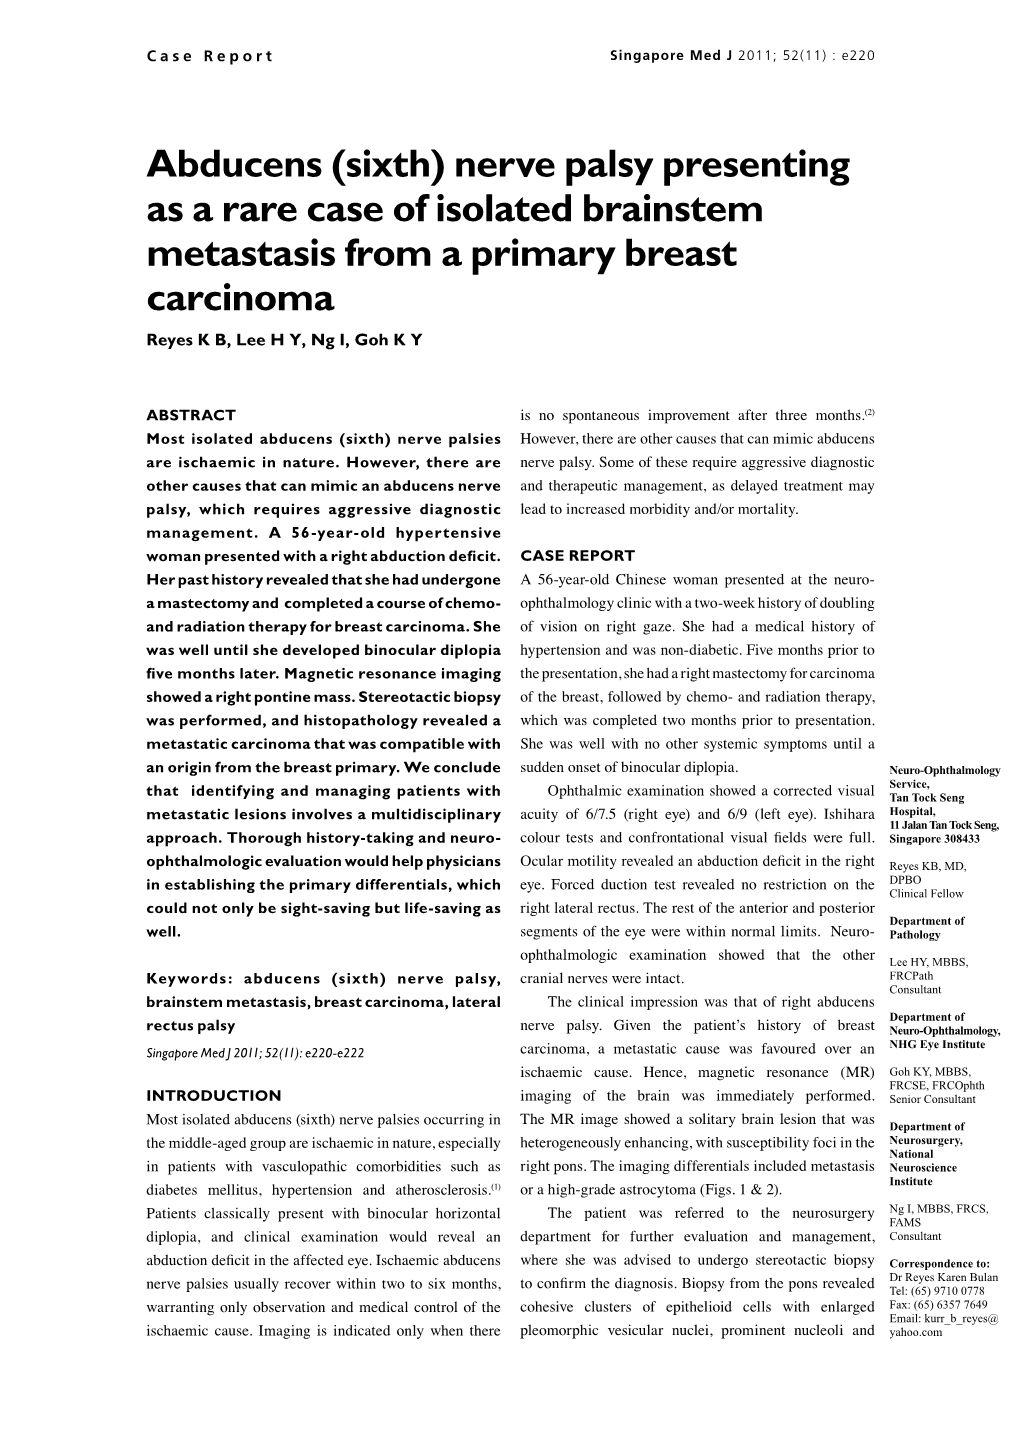 Abducens (Sixth) Nerve Palsy Presenting As a Rare Case of Isolated Brainstem Metastasis from a Primary Breast Carcinoma Reyes K B, Lee H Y, Ng I, Goh K Y